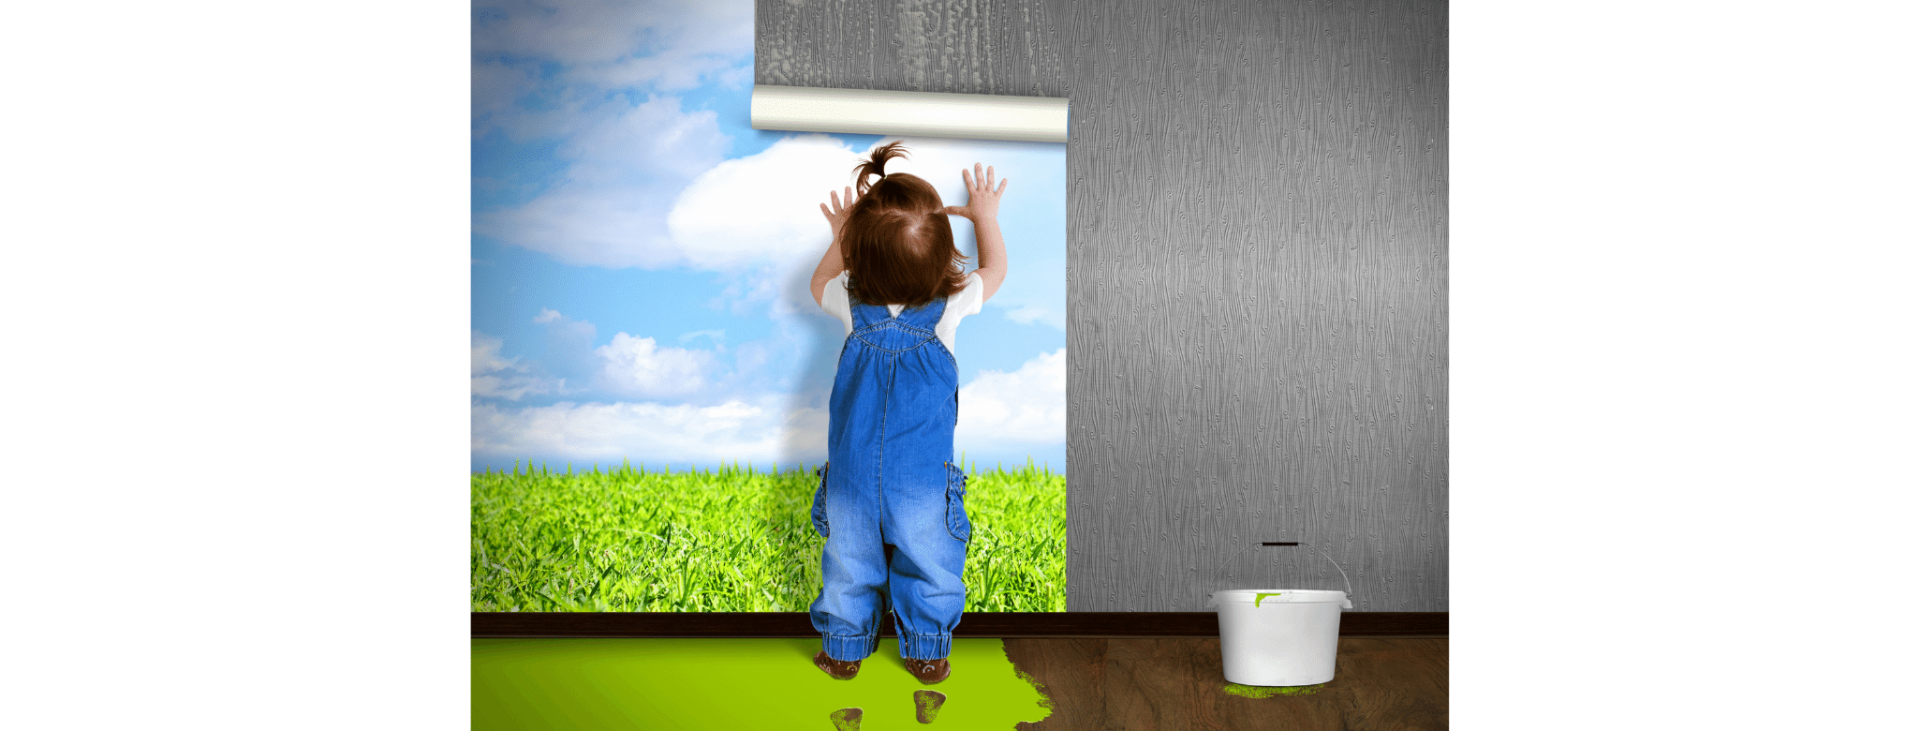 Young child hanging wallpaper